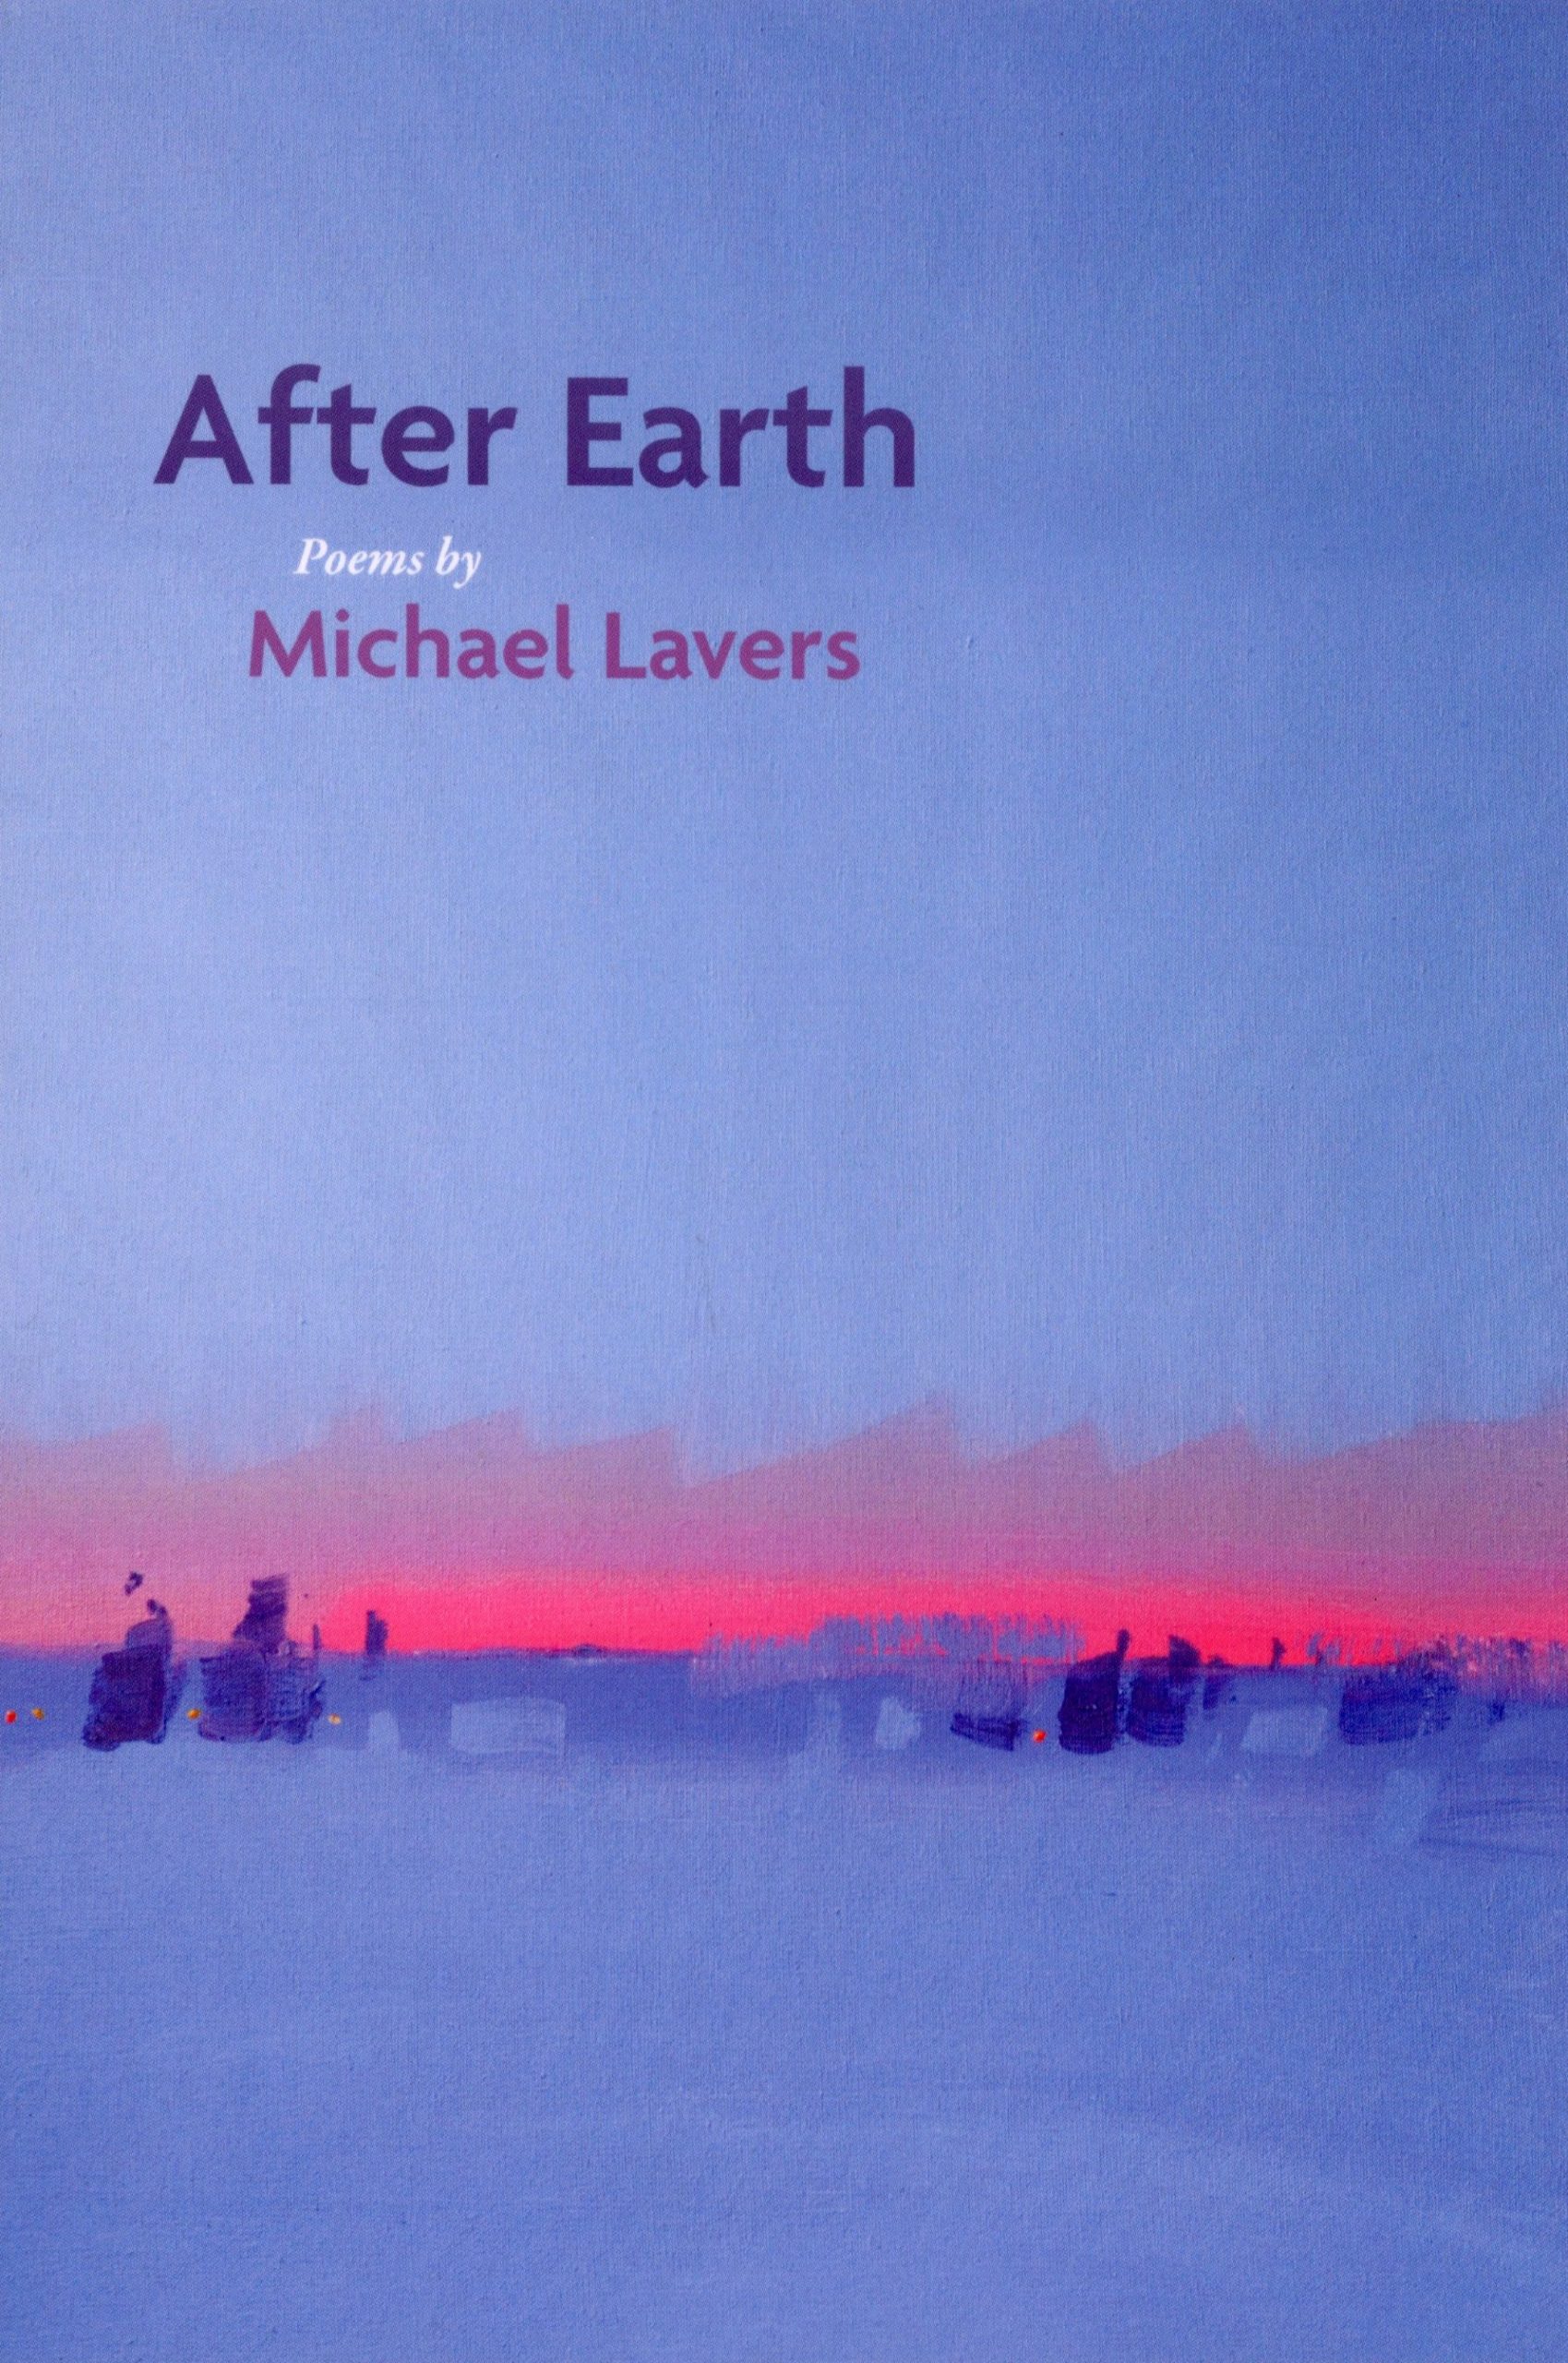 Image of the front cover of After Earth.